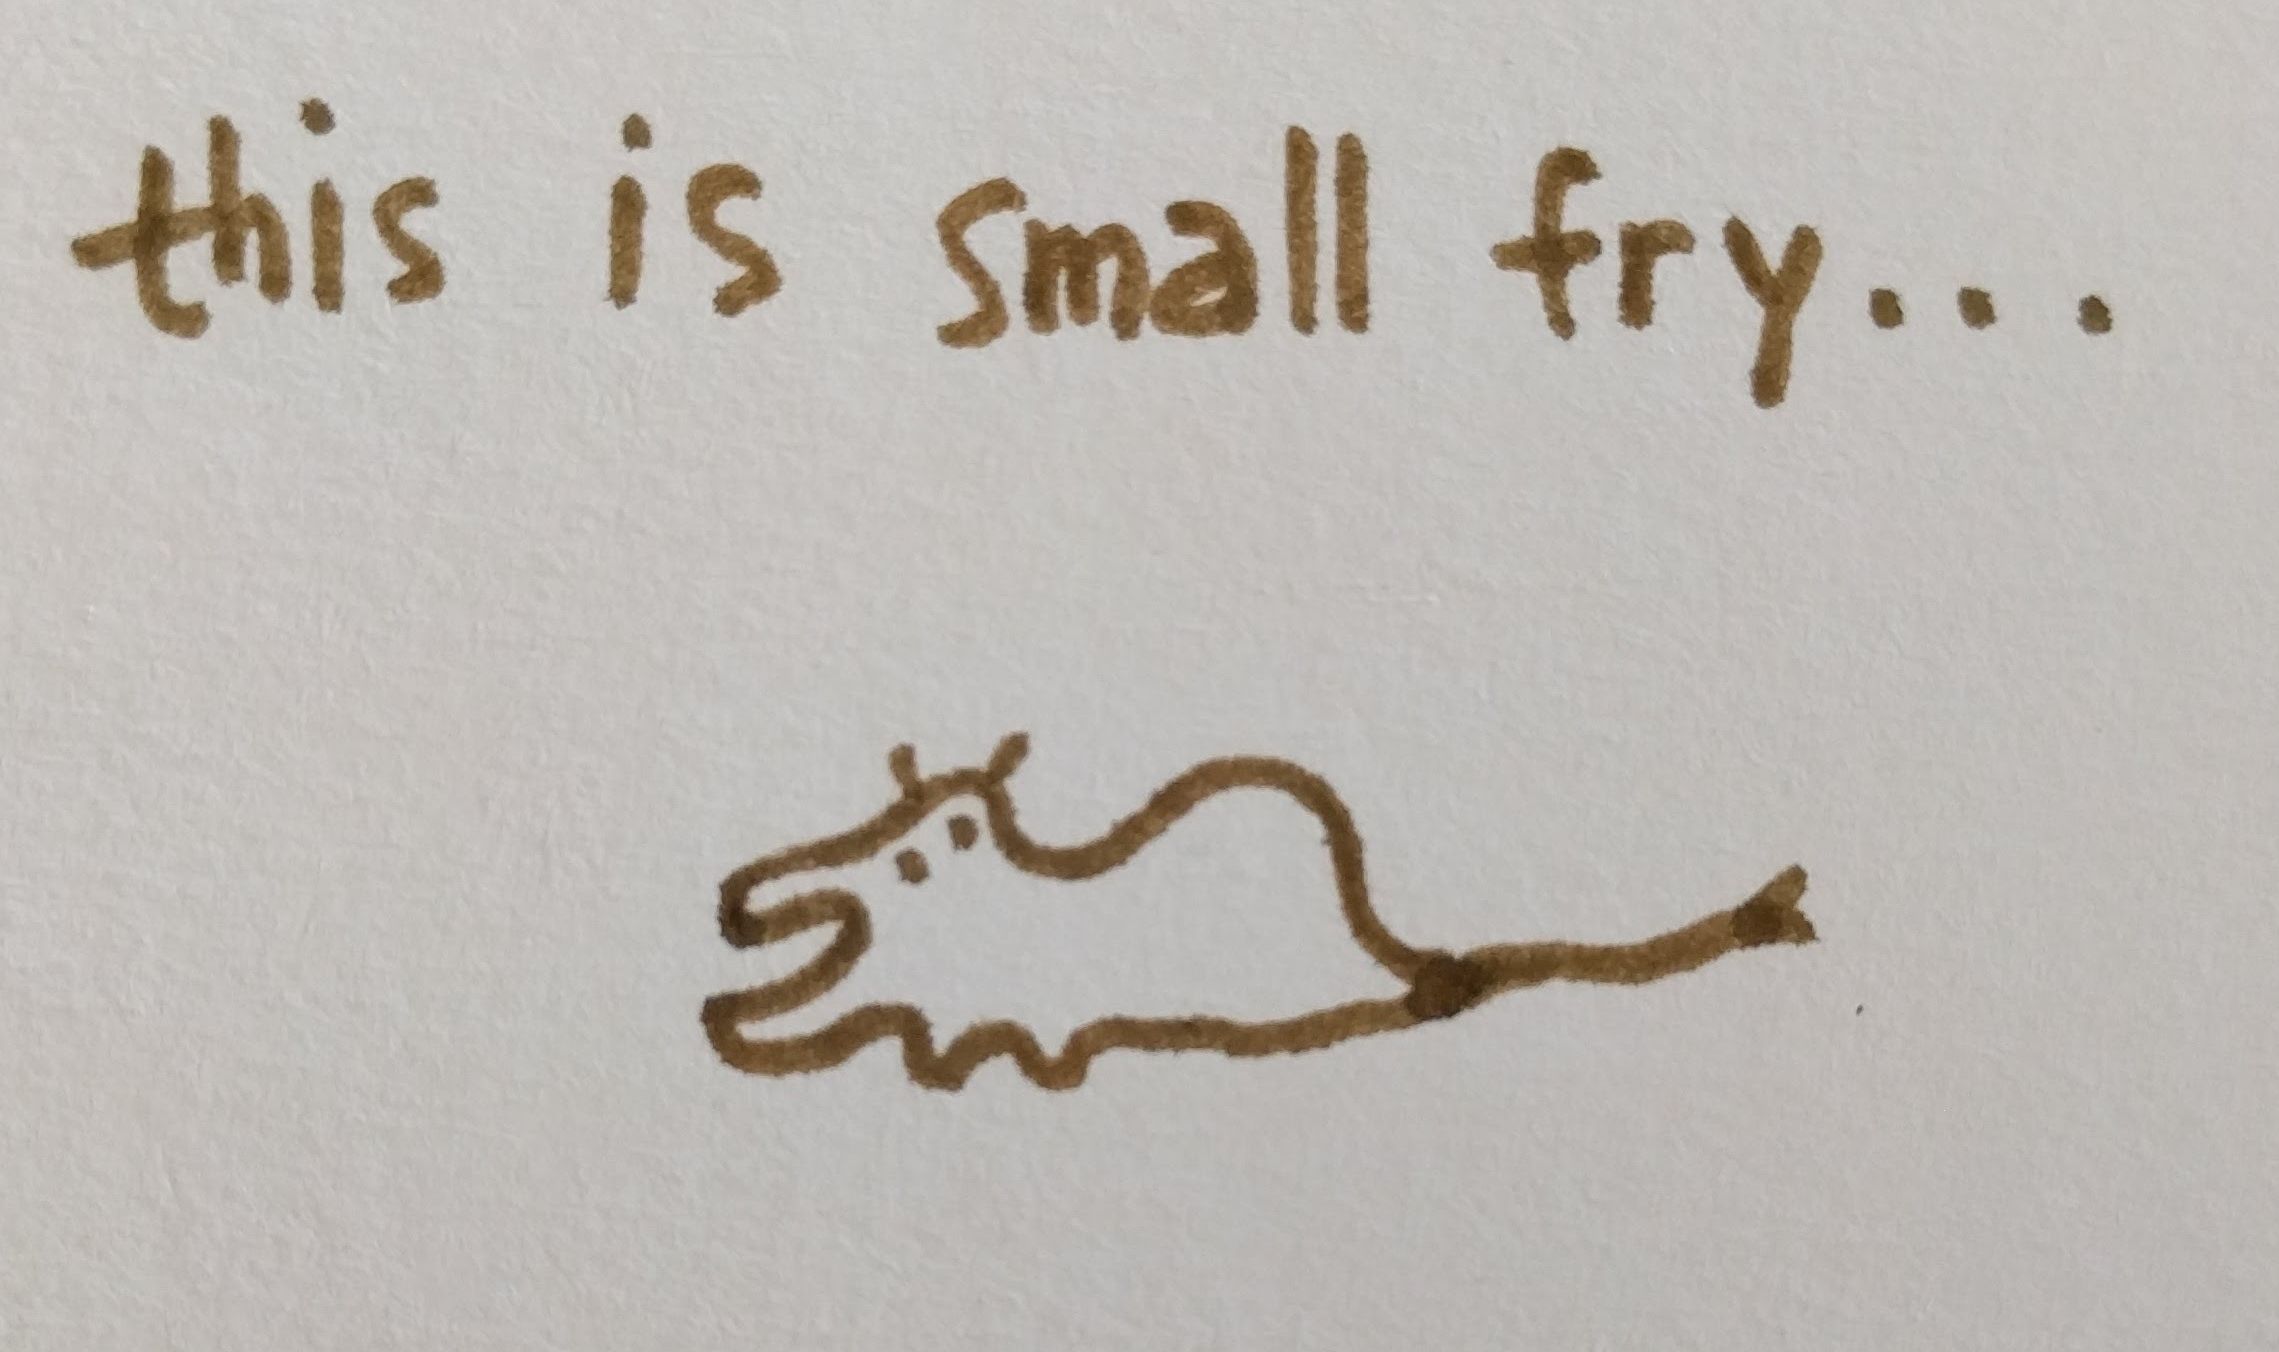 this is small fry